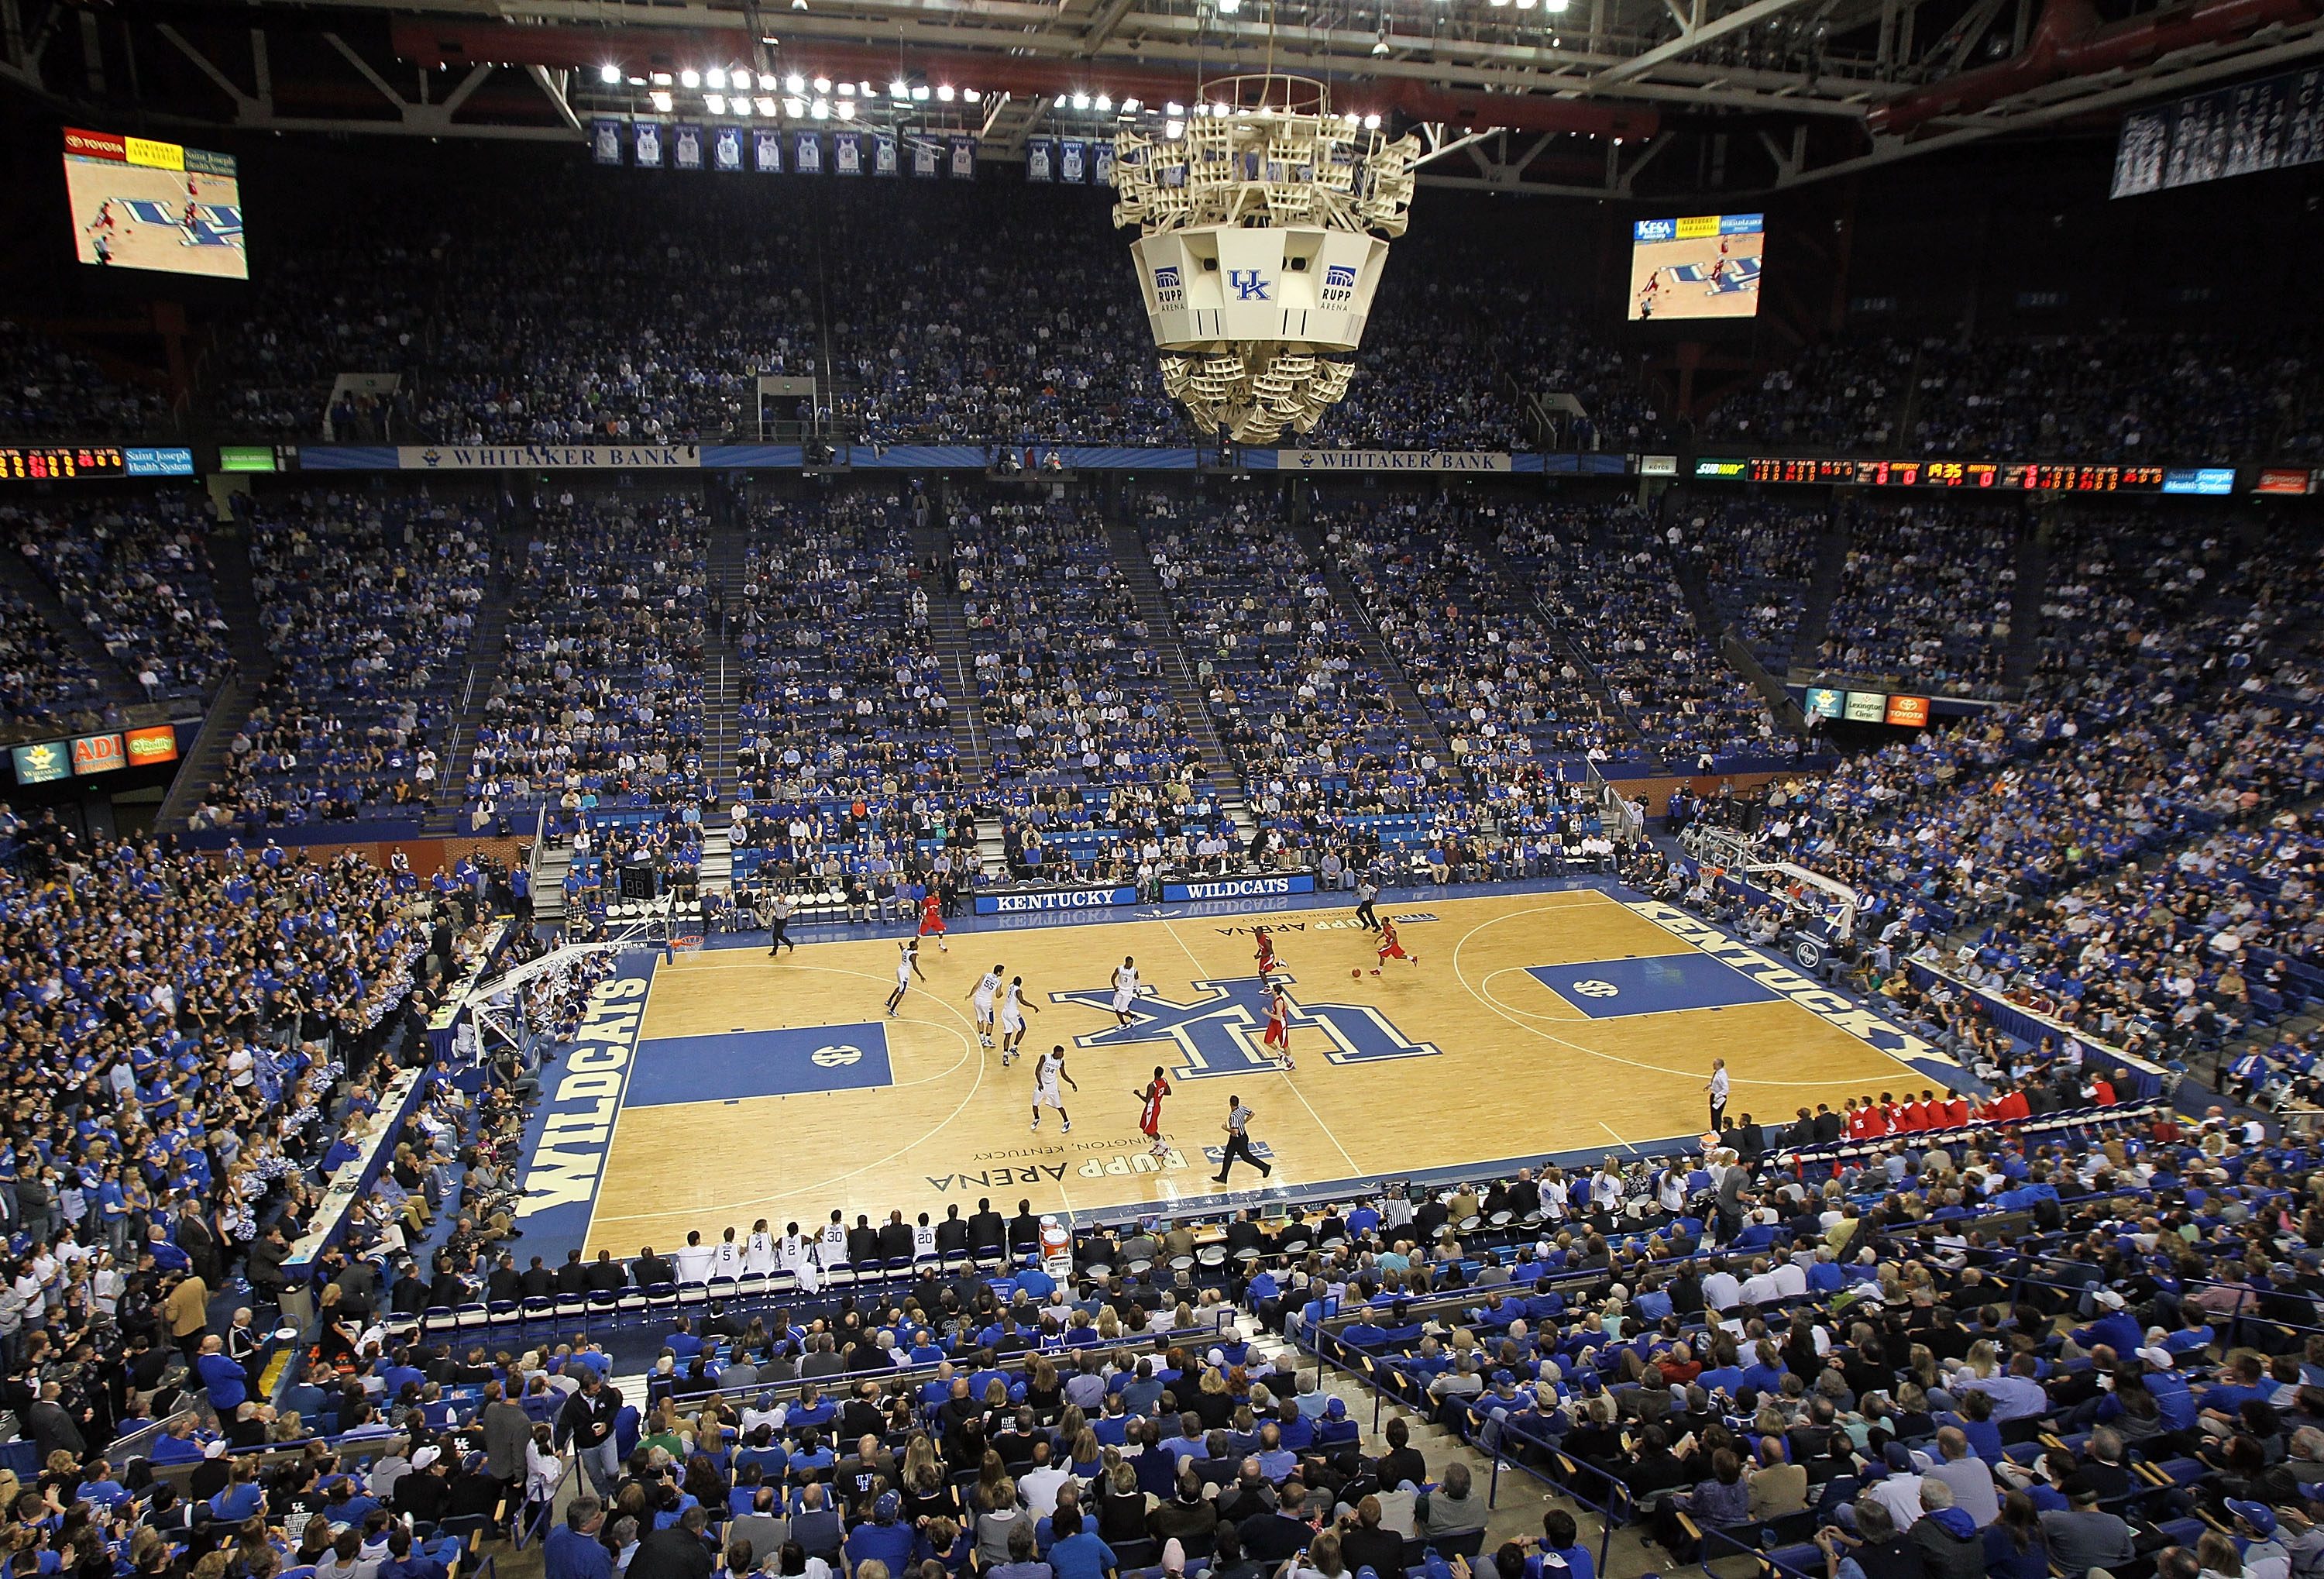 LEXINGTON, KY - NOVEMBER 30:  A general view of Rupp Arena during the Kentucky Wildcats game against the Boston University Terriers on November 30, 2010 in Lexington, Kentucky.  (Photo by Andy Lyons/Getty Images)